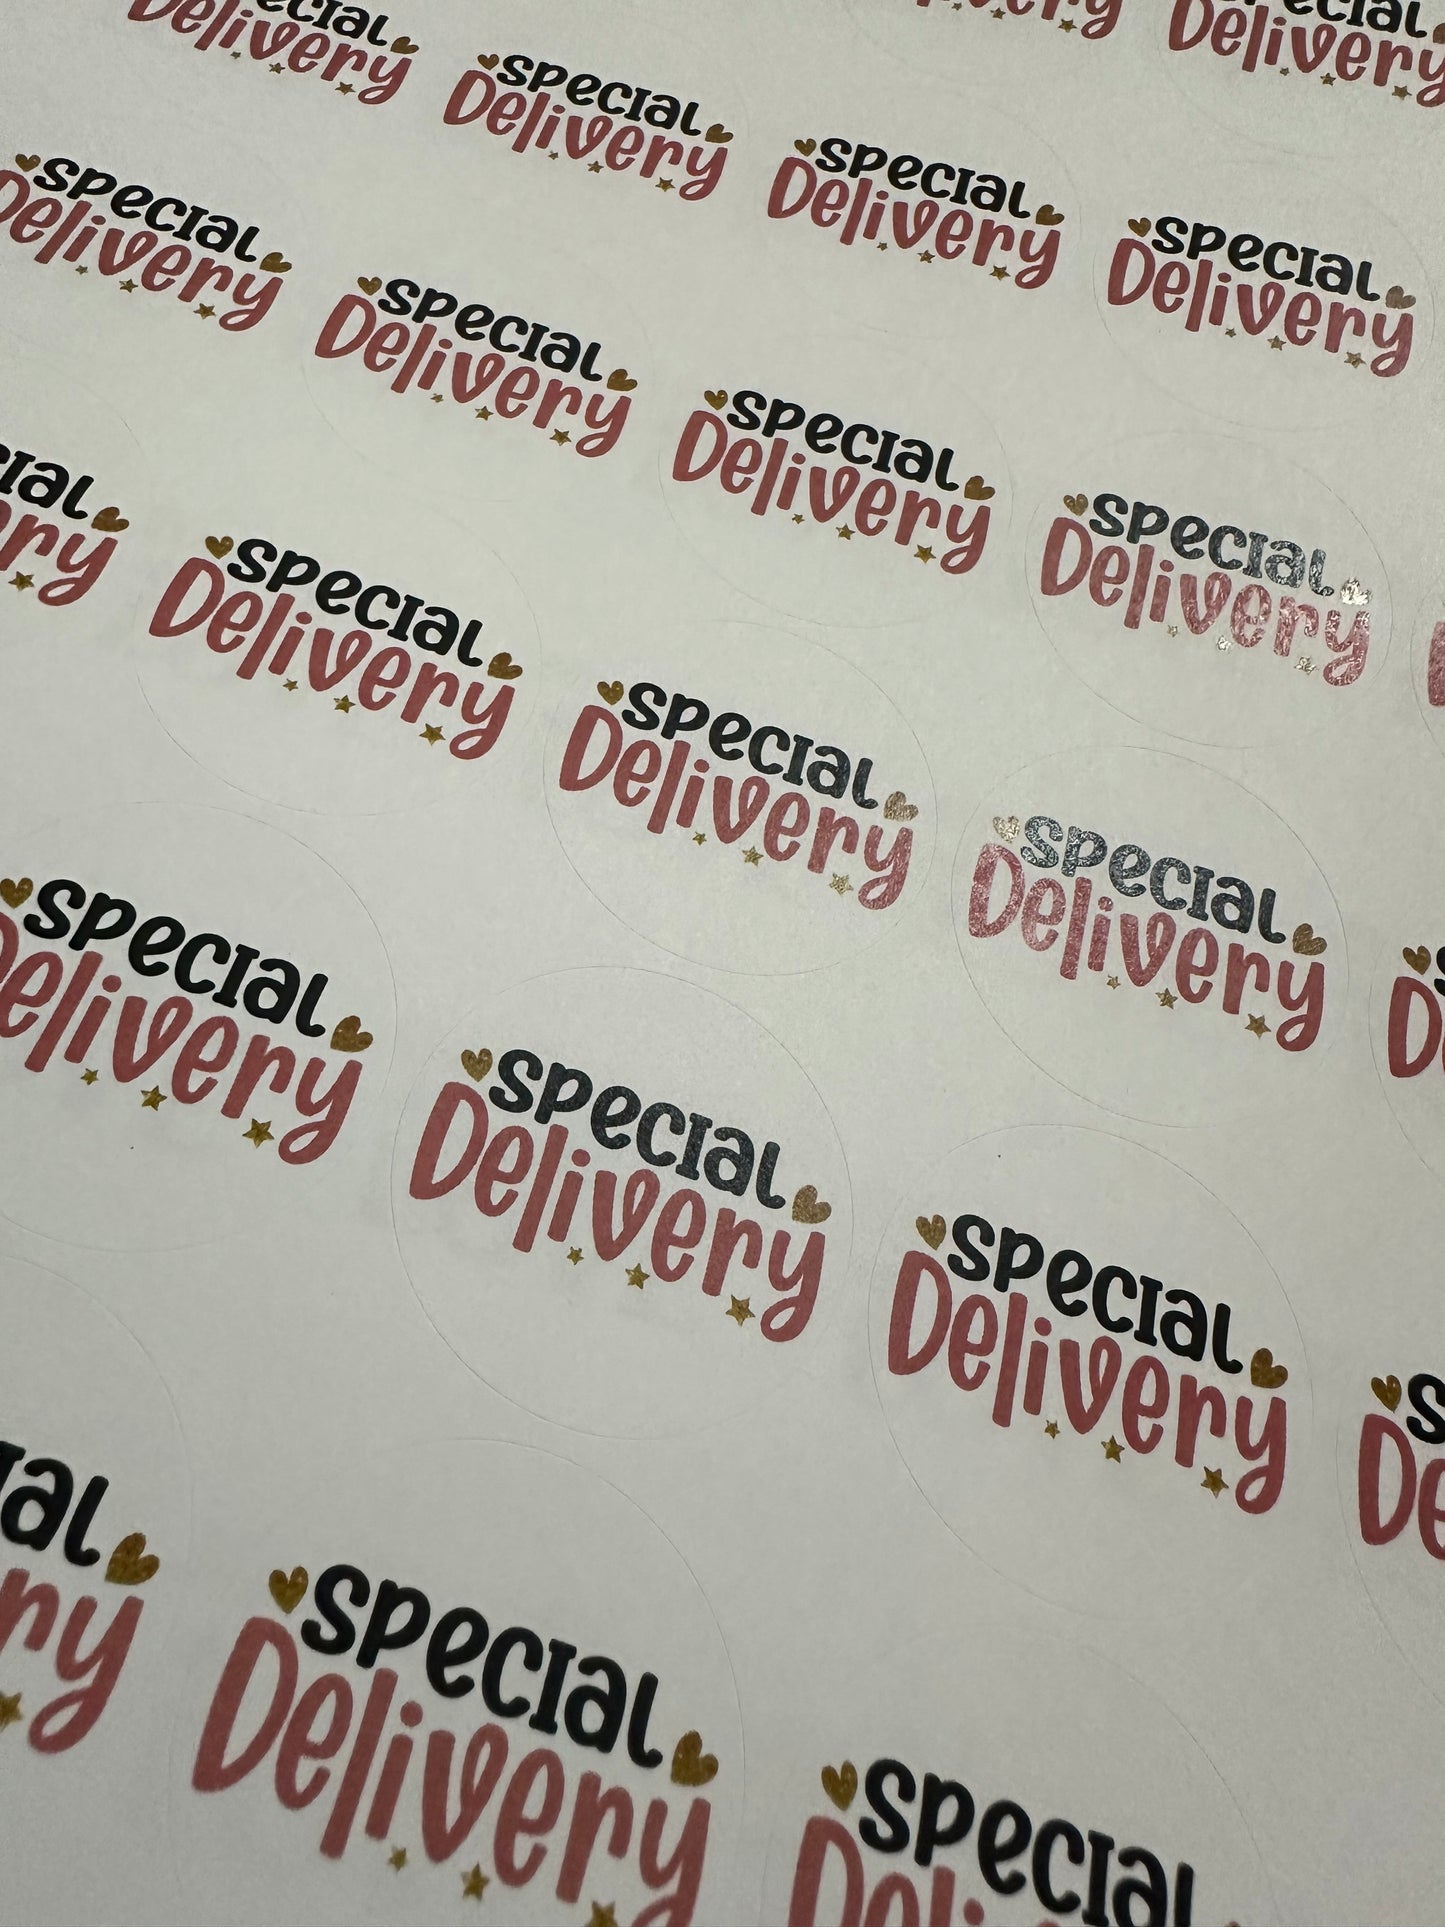 Special Delivery Stickers